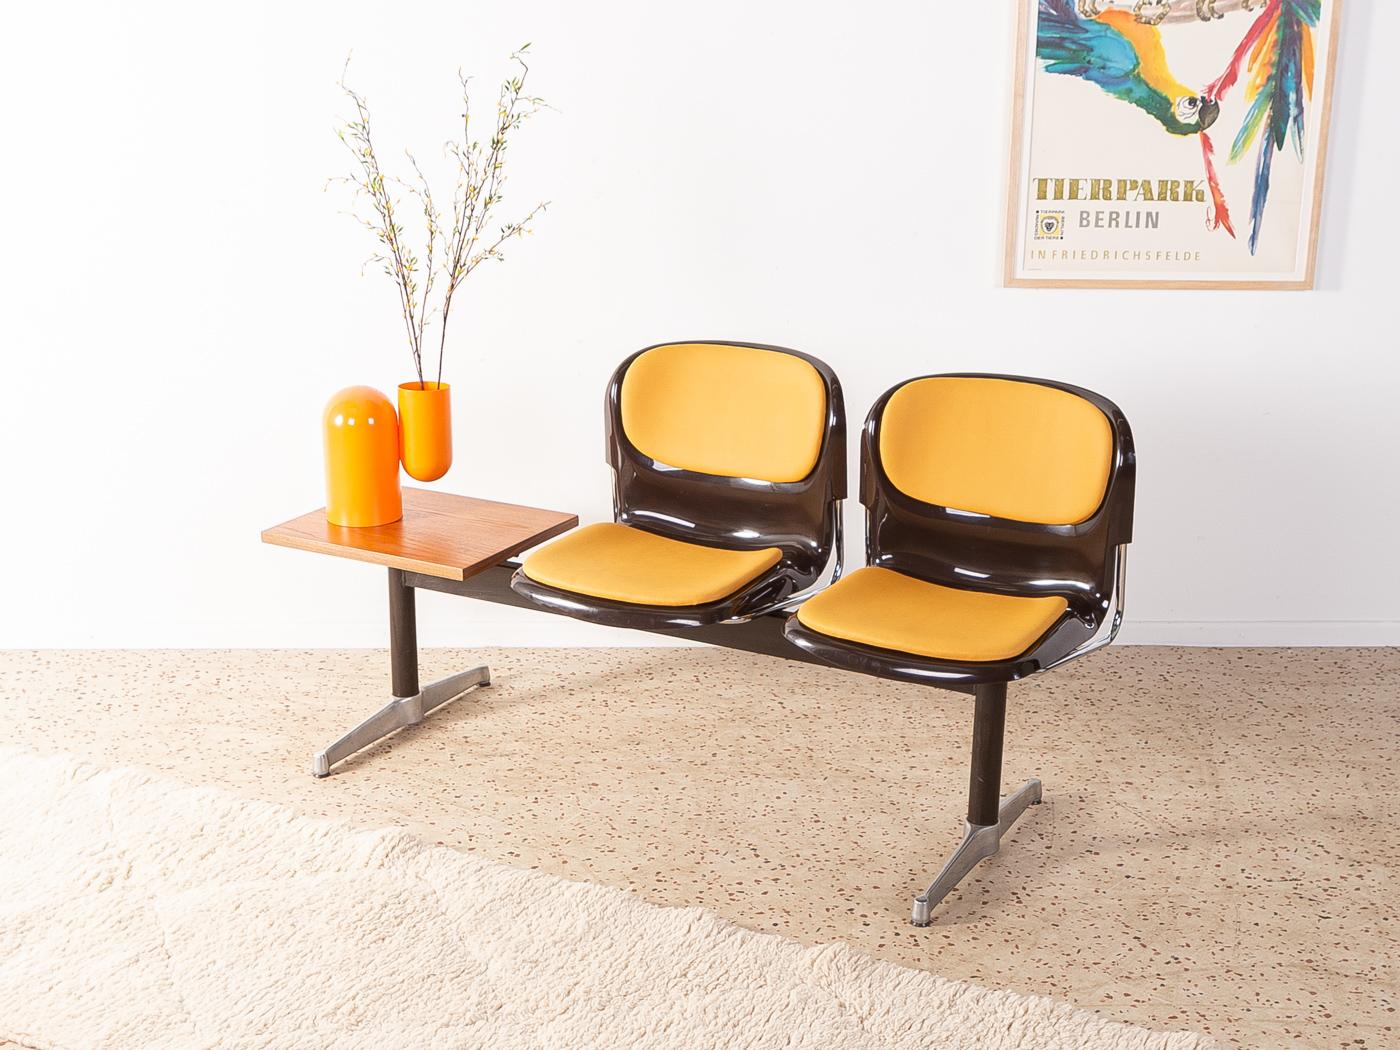 Classic waiting bench from the 1970s. High-quality steel and stainless steel frame with two plastic seat shells in brown and a table top in teak veneer. The seat shells have been reupholstered and covered with a high-quality leatherette in ochre.